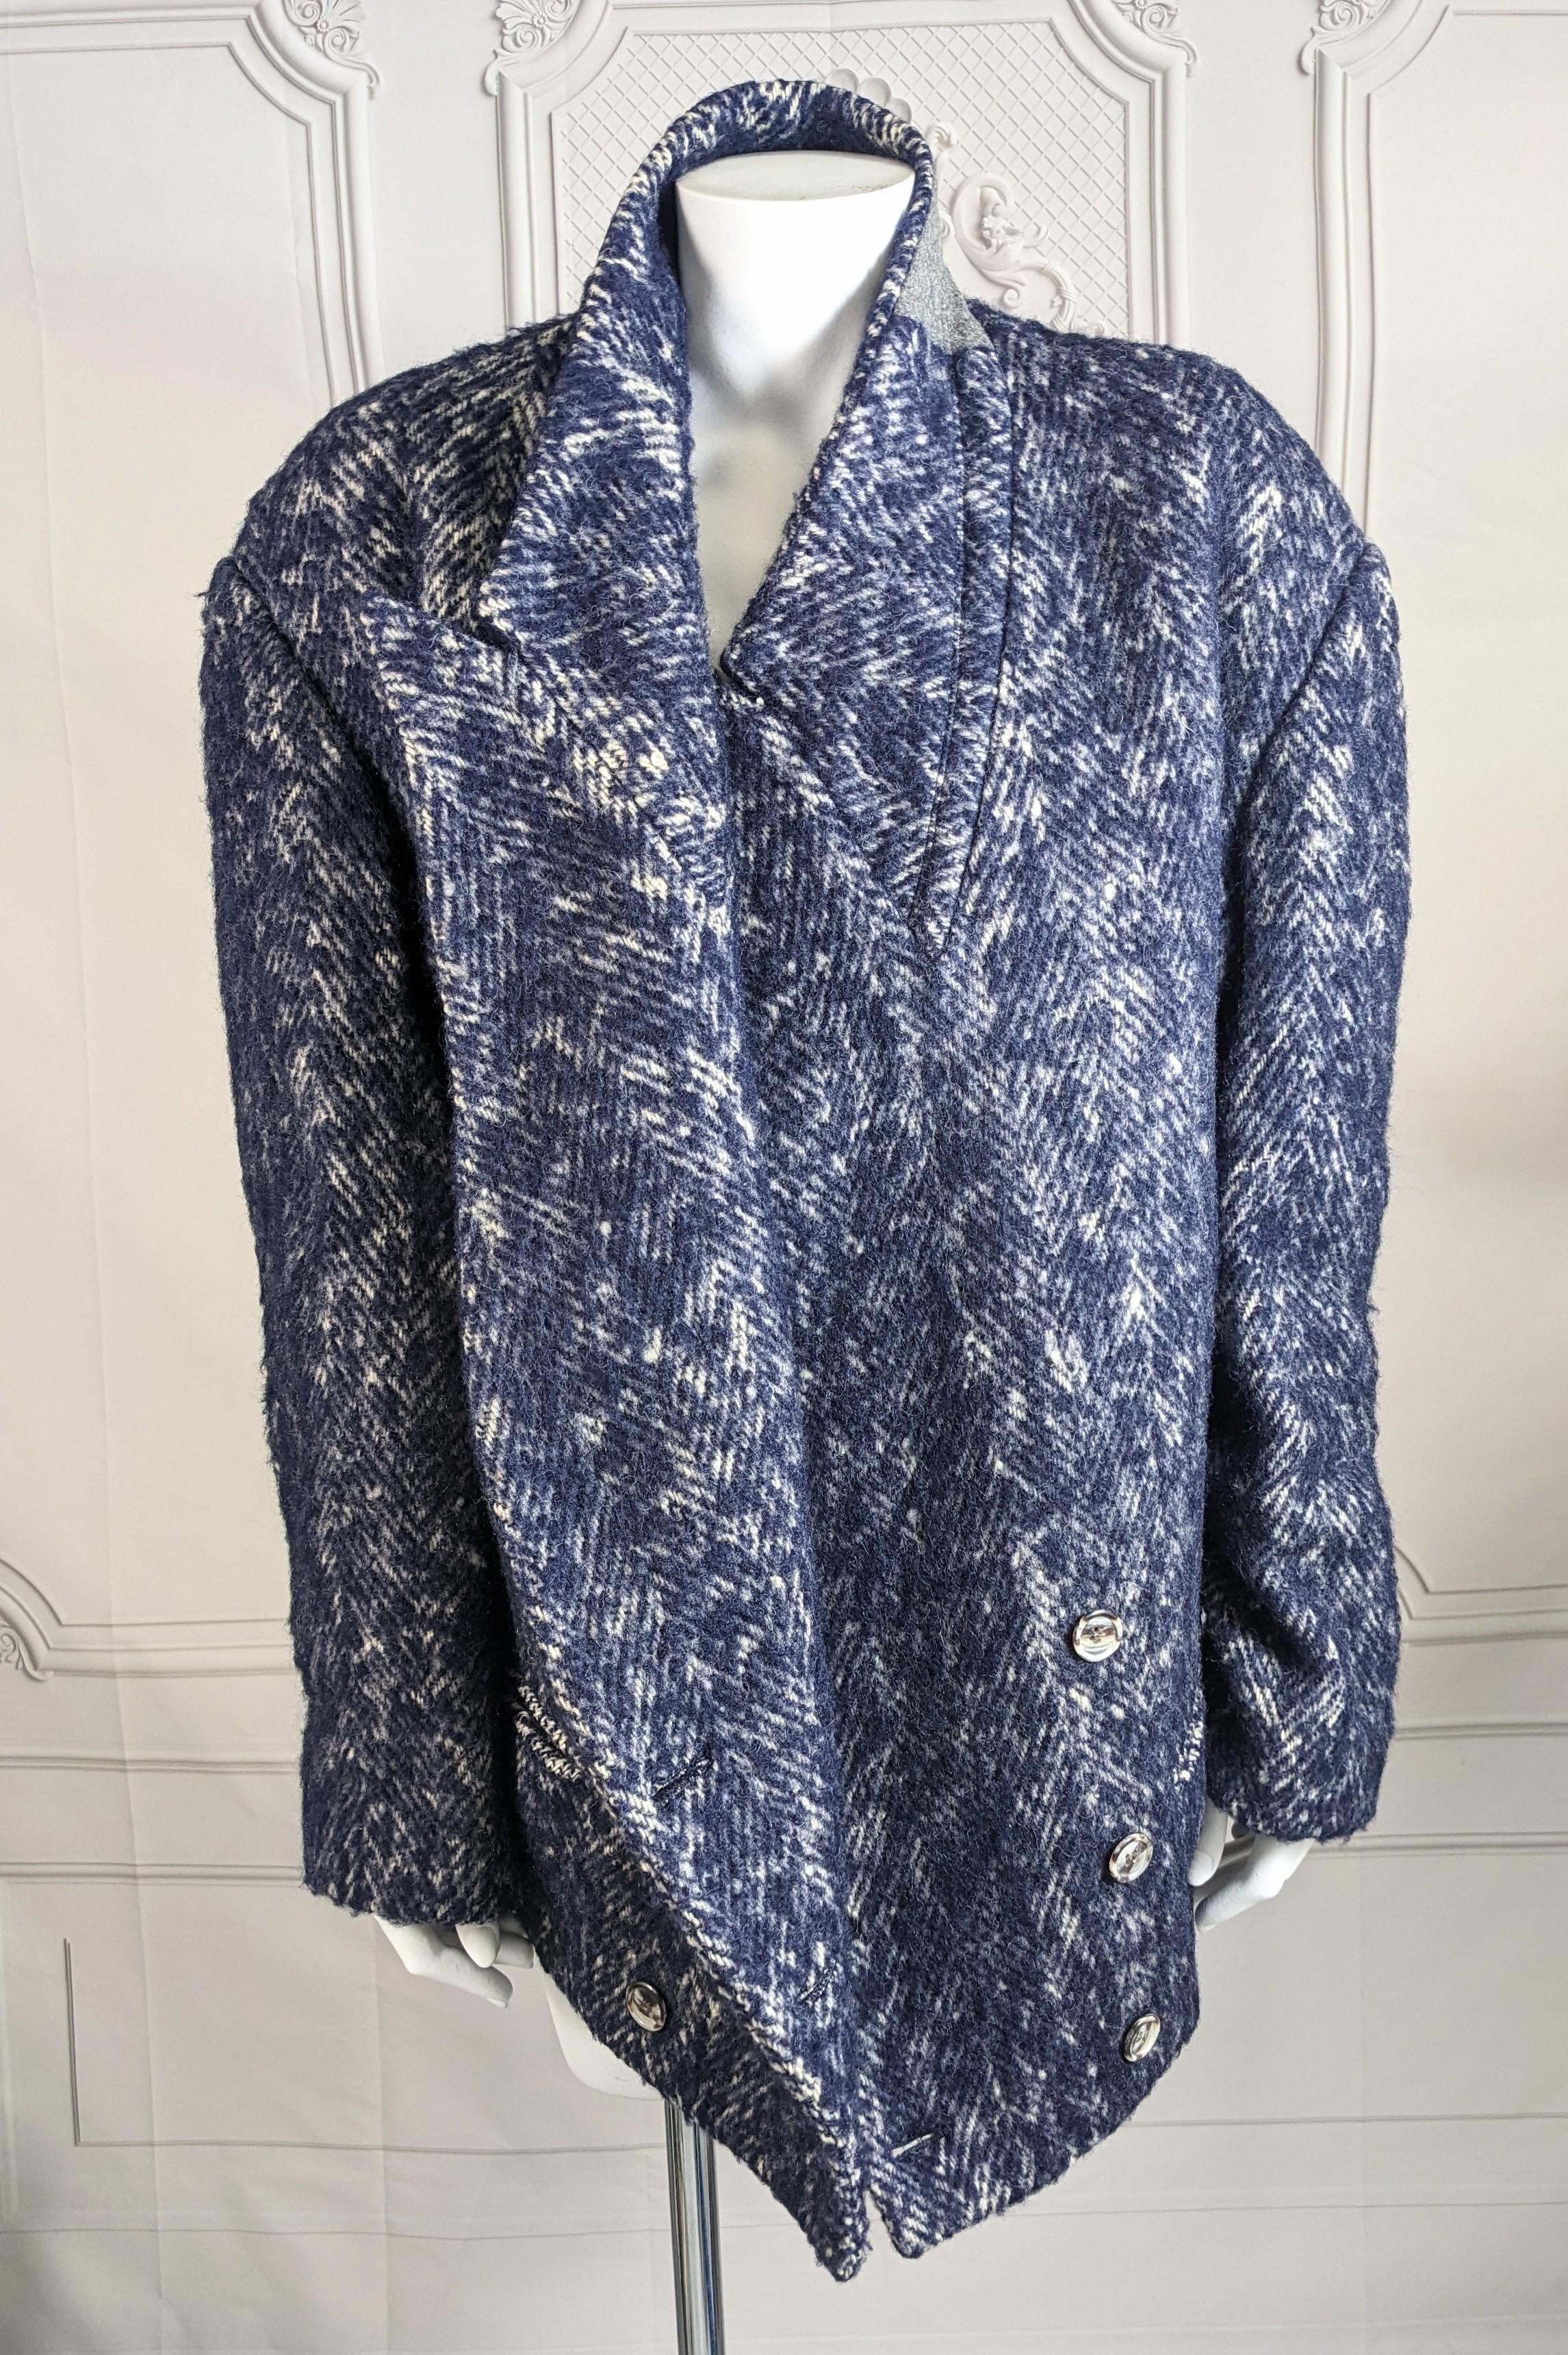 Yohji Yamamoto Rare Early Tweed Jacket  In Good Condition For Sale In New York, NY